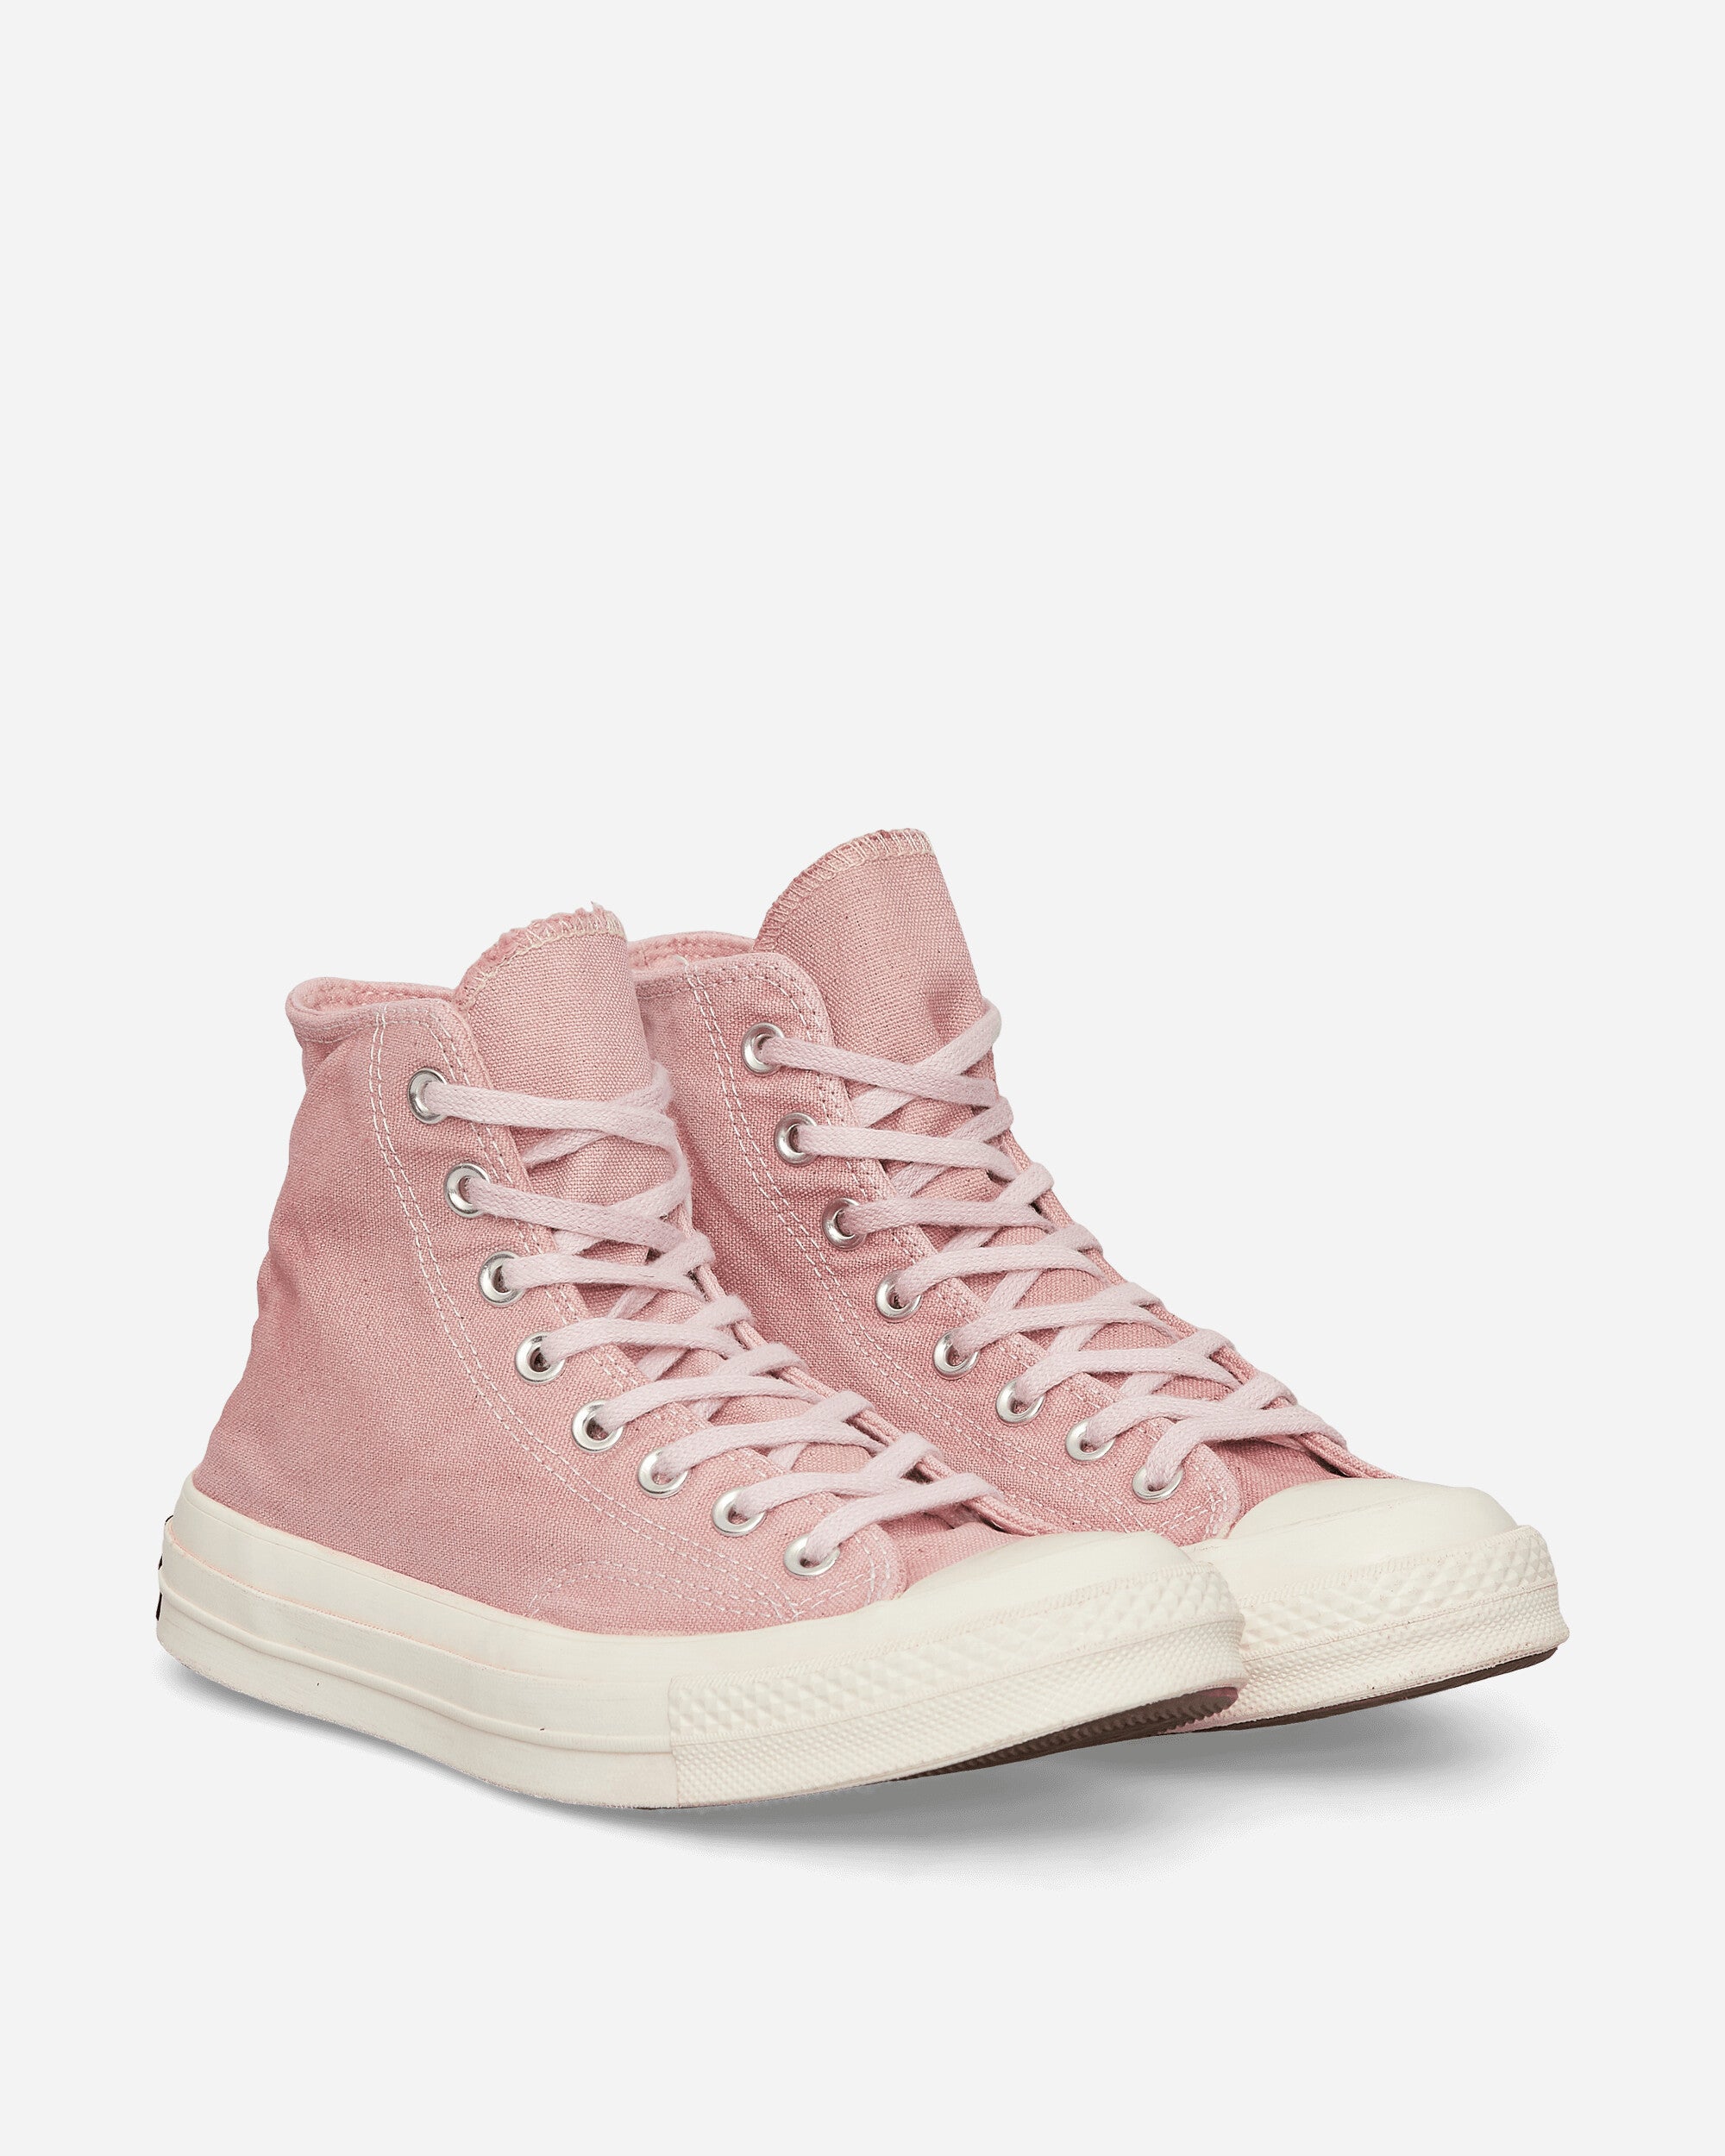 Converse Chuck 70 Canvas Ltd Icdc Strawberry Dyed Sneakers High A06917C